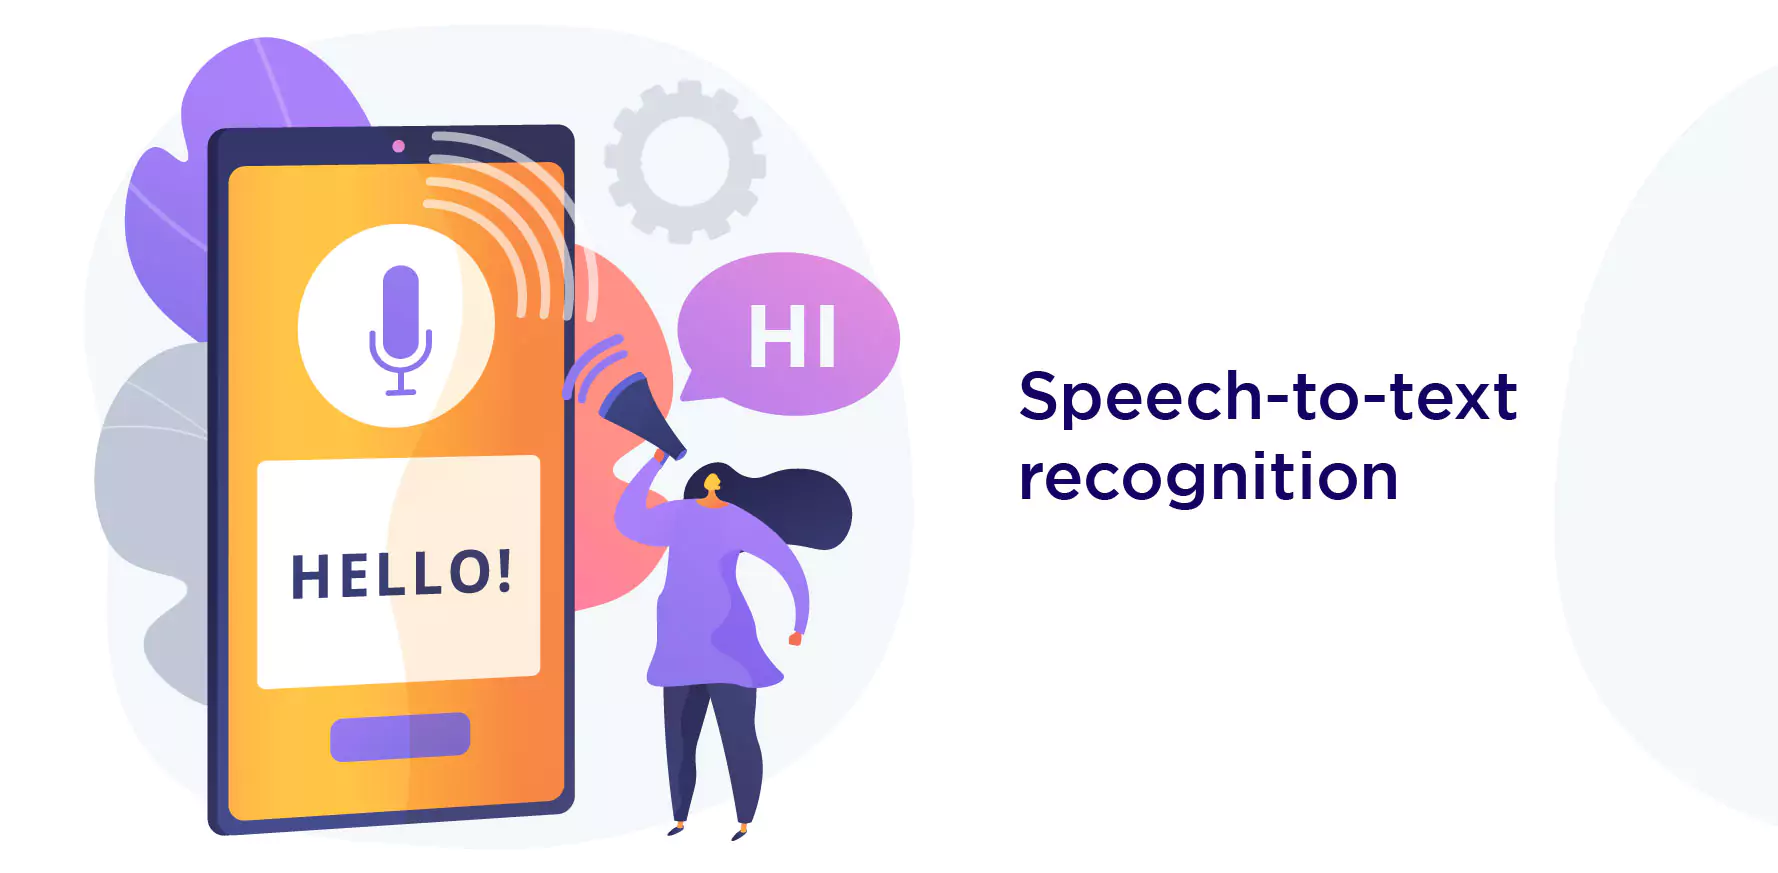 Speech-to-text recognition